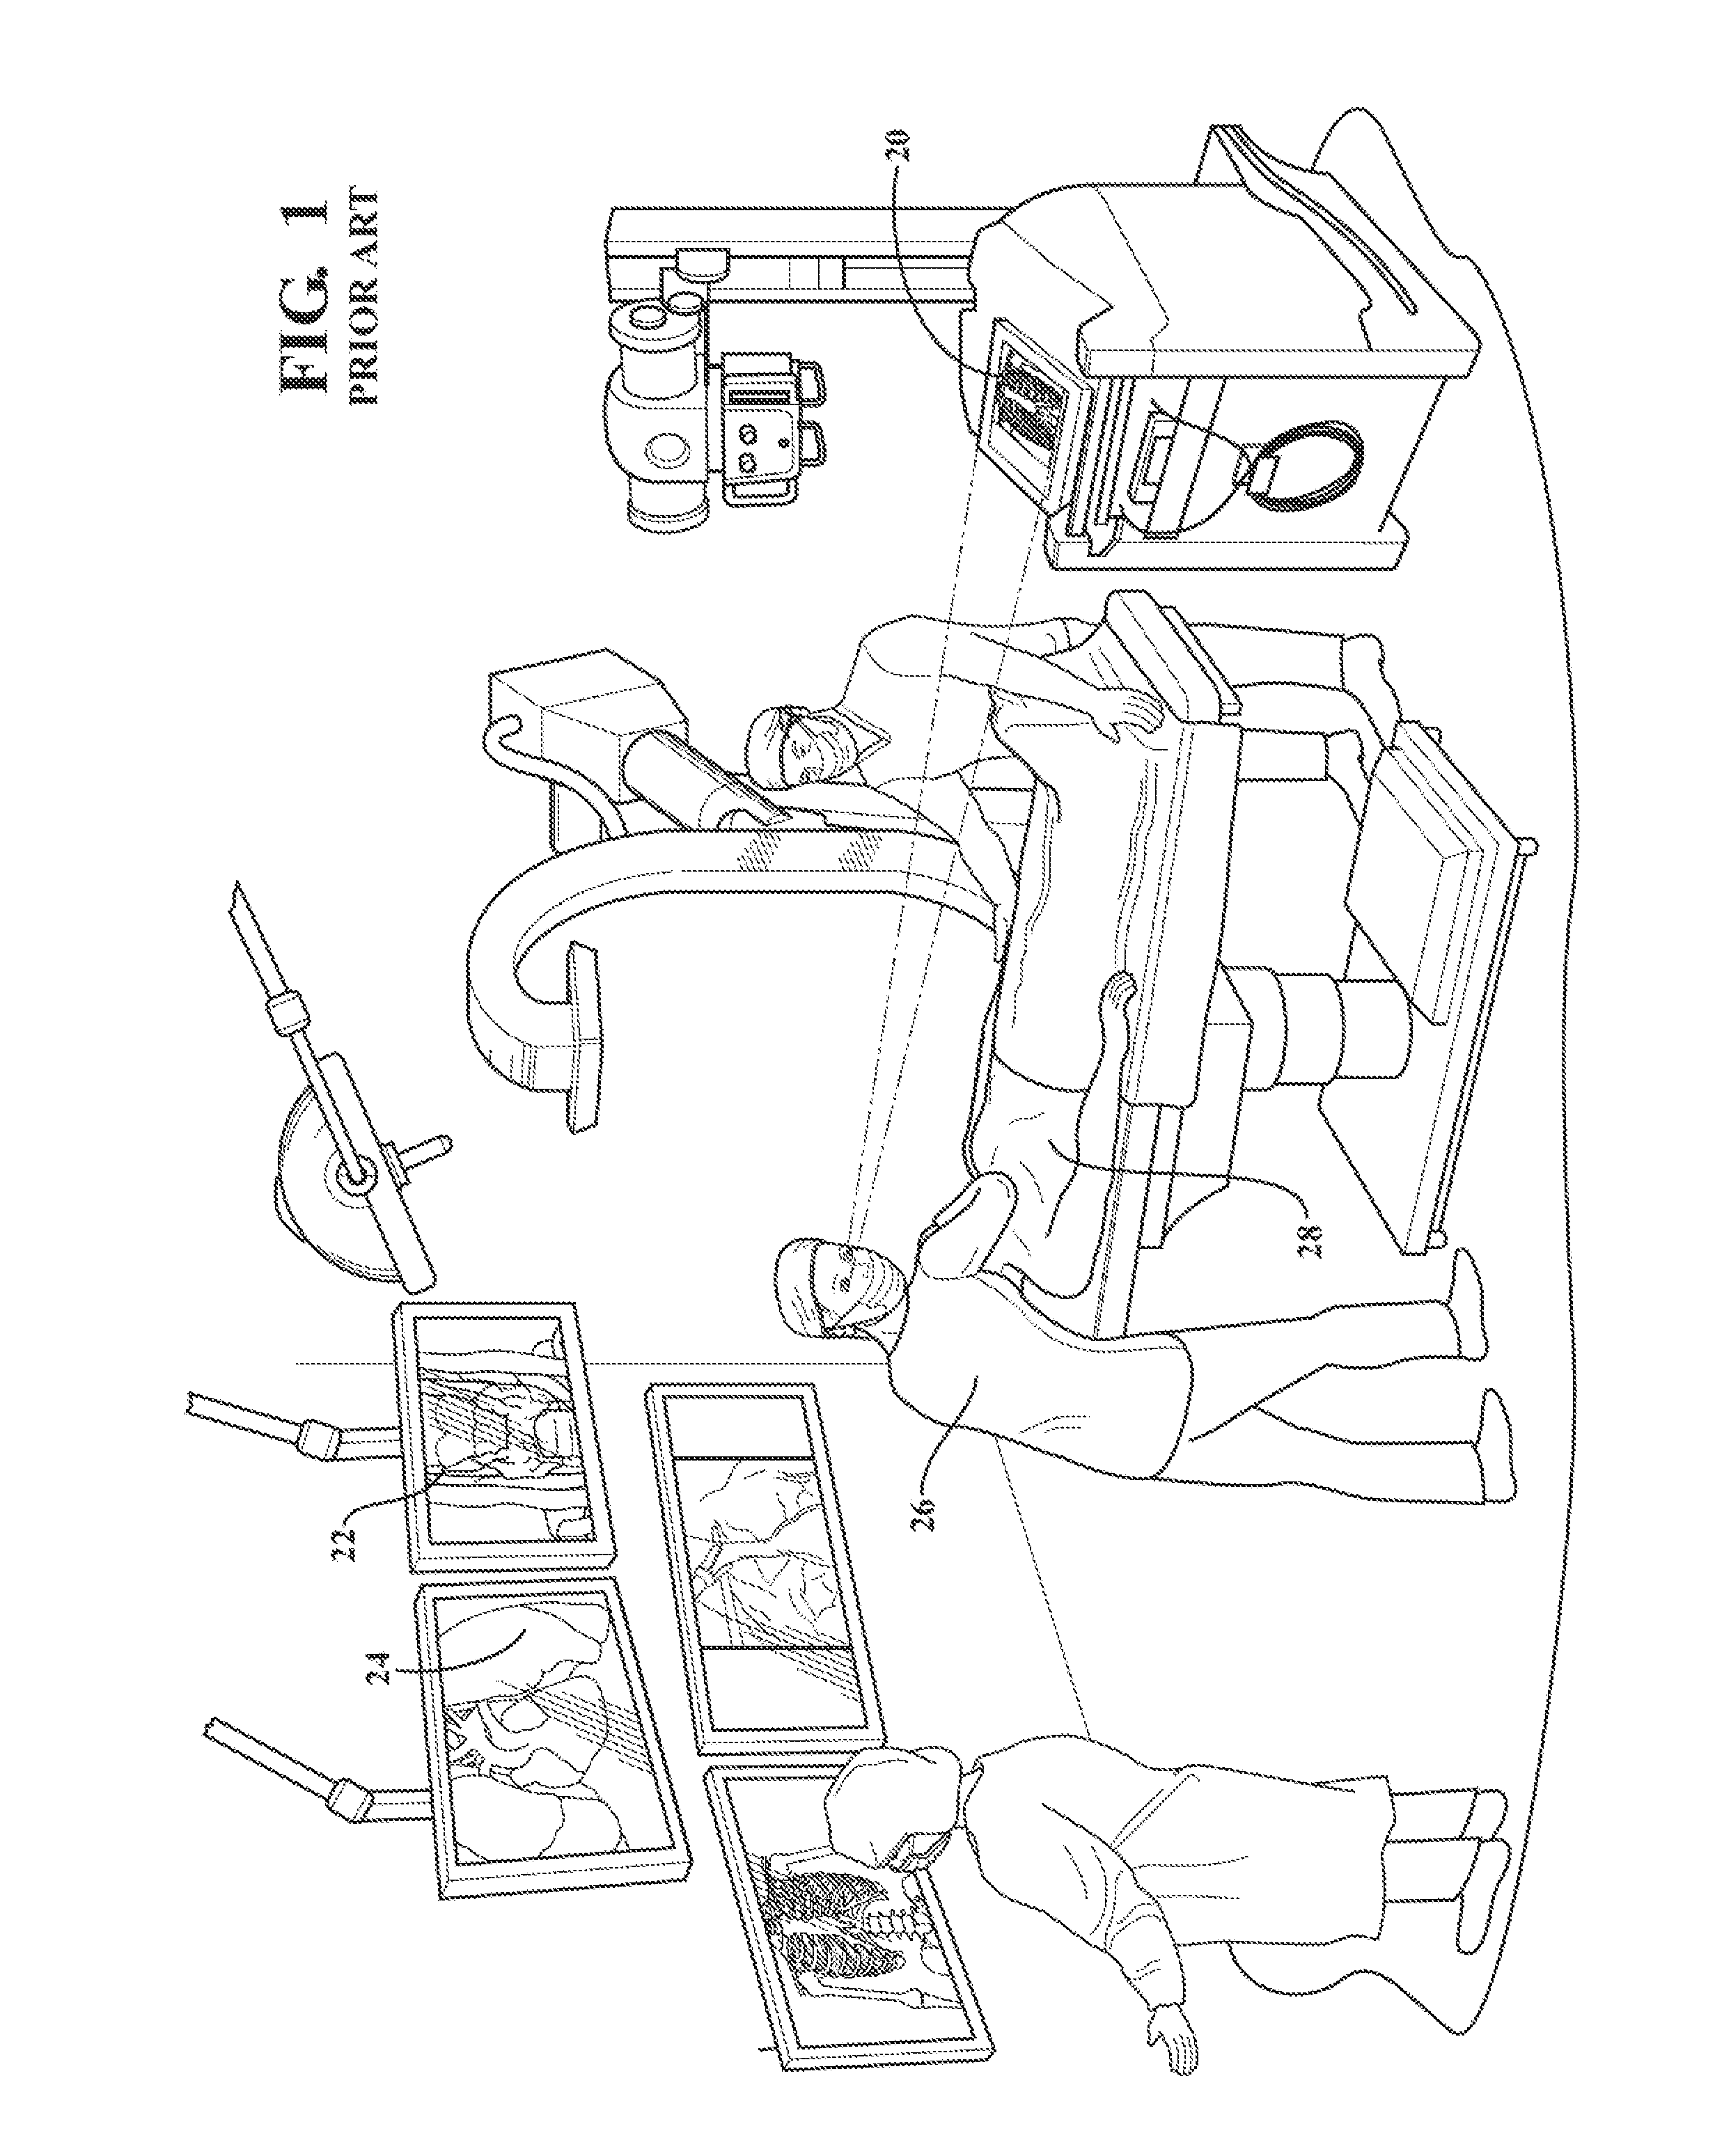 Intra-operative medical image viewing system and method